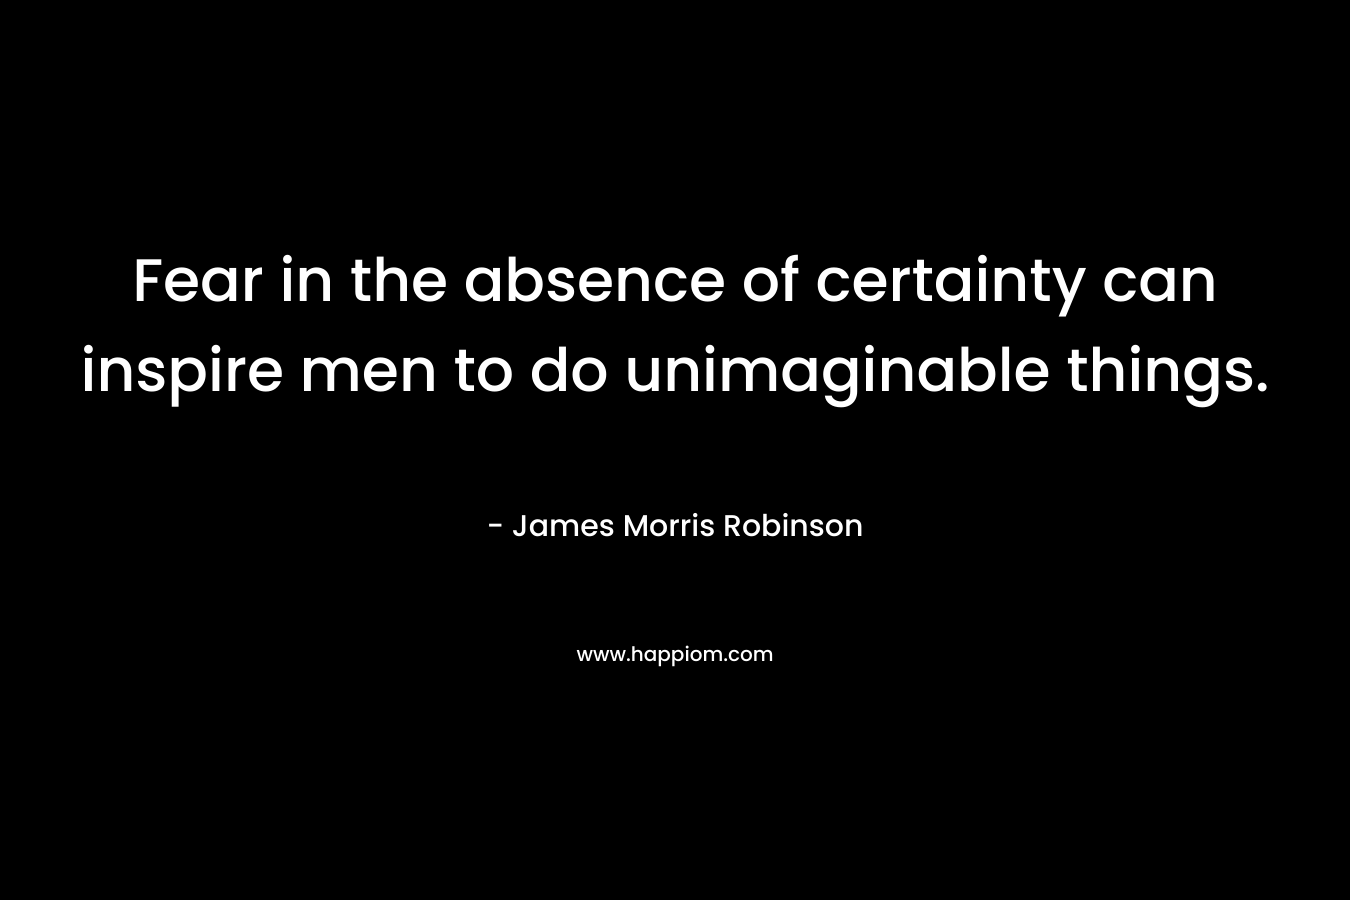 Fear in the absence of certainty can inspire men to do unimaginable things. – James Morris Robinson